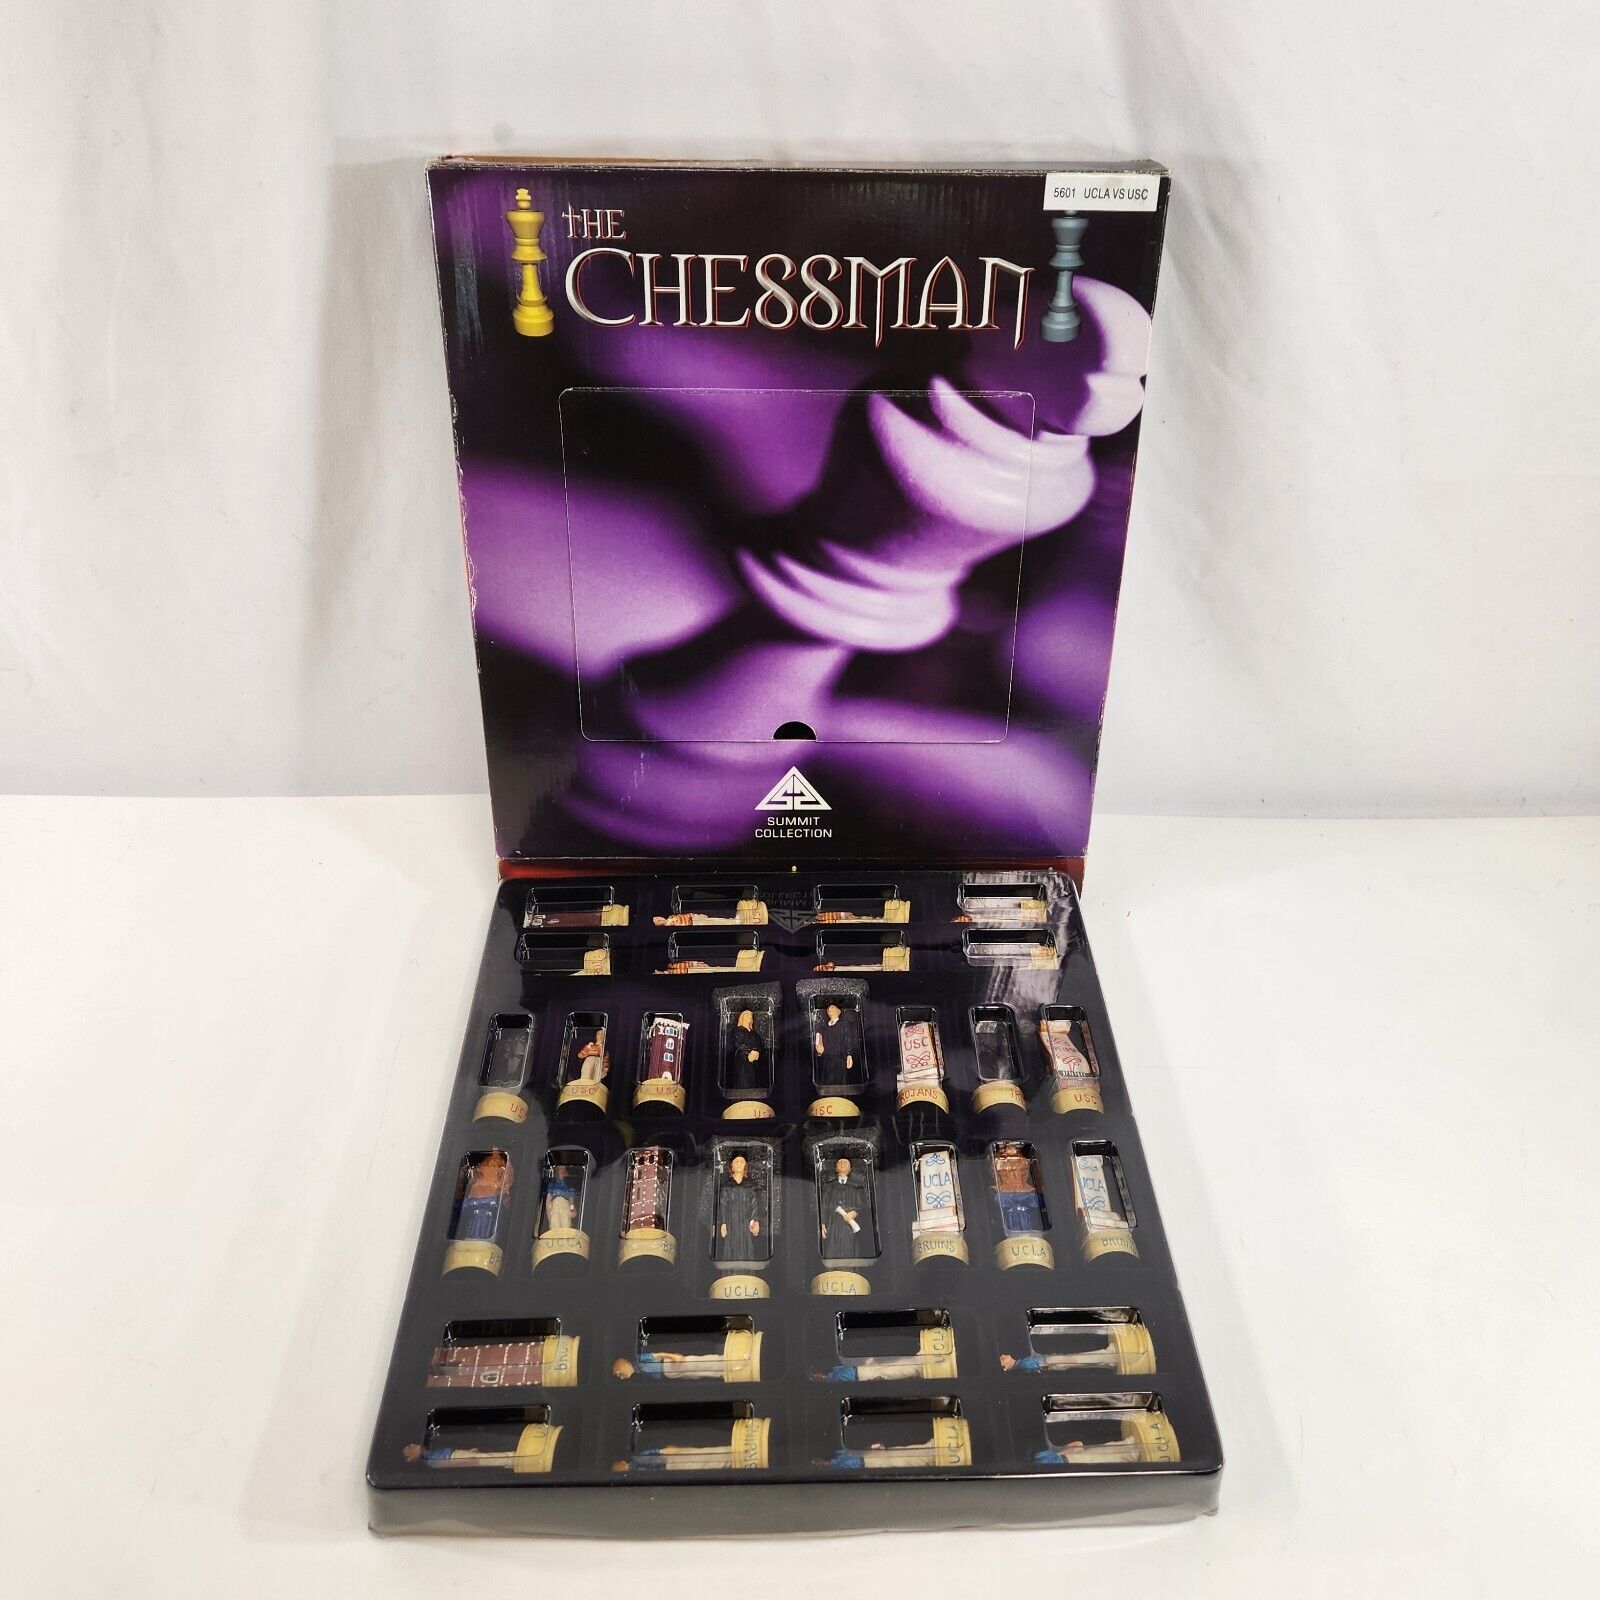 Chessman UCLA vs USC Chest Set Summit Collection College Pieces Only NO BOARD - $67.54